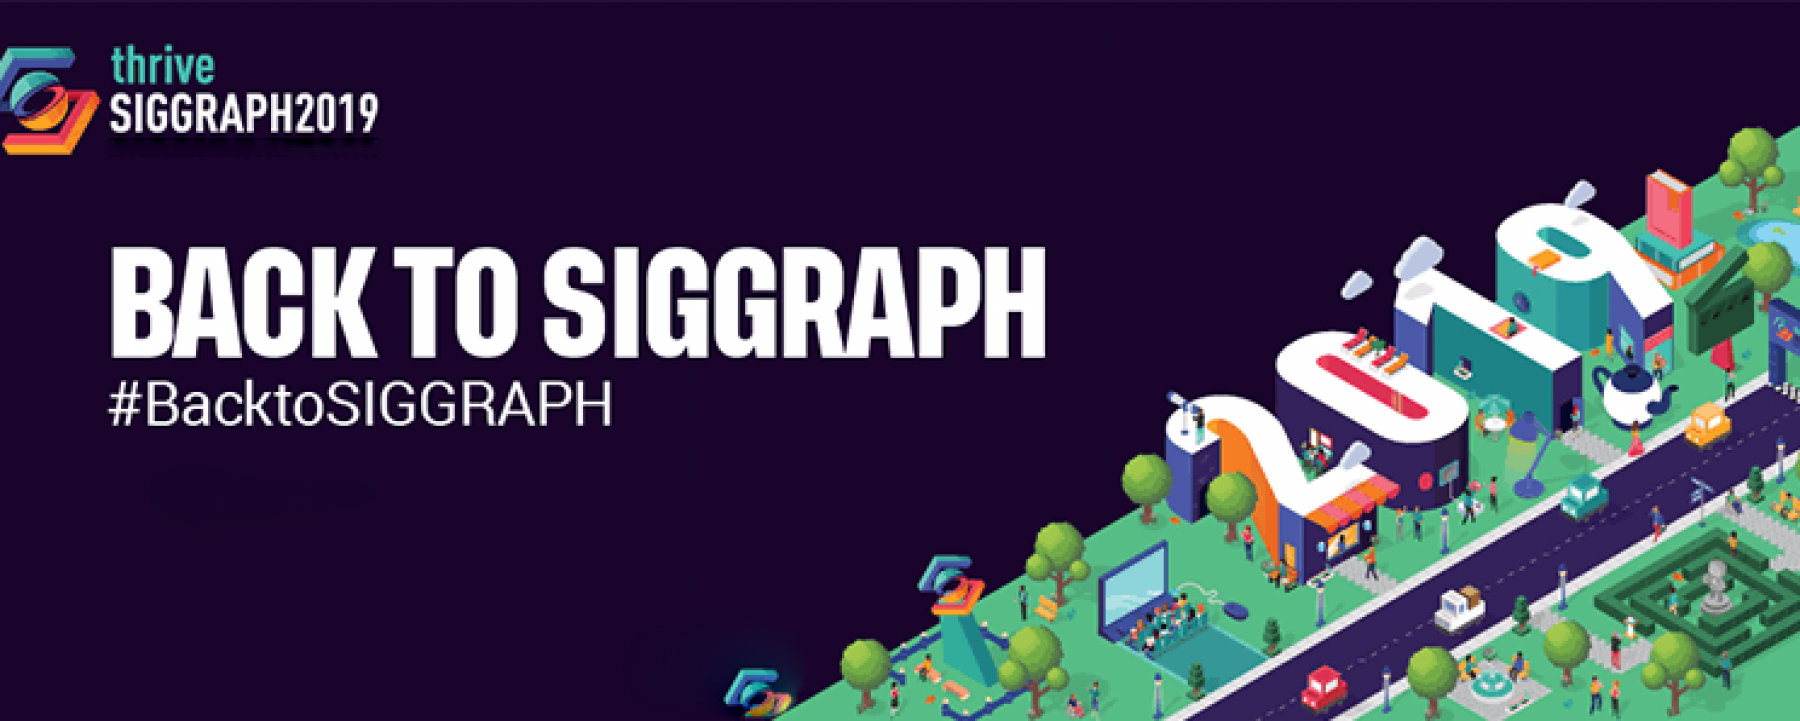 Back to SIGGRAPH